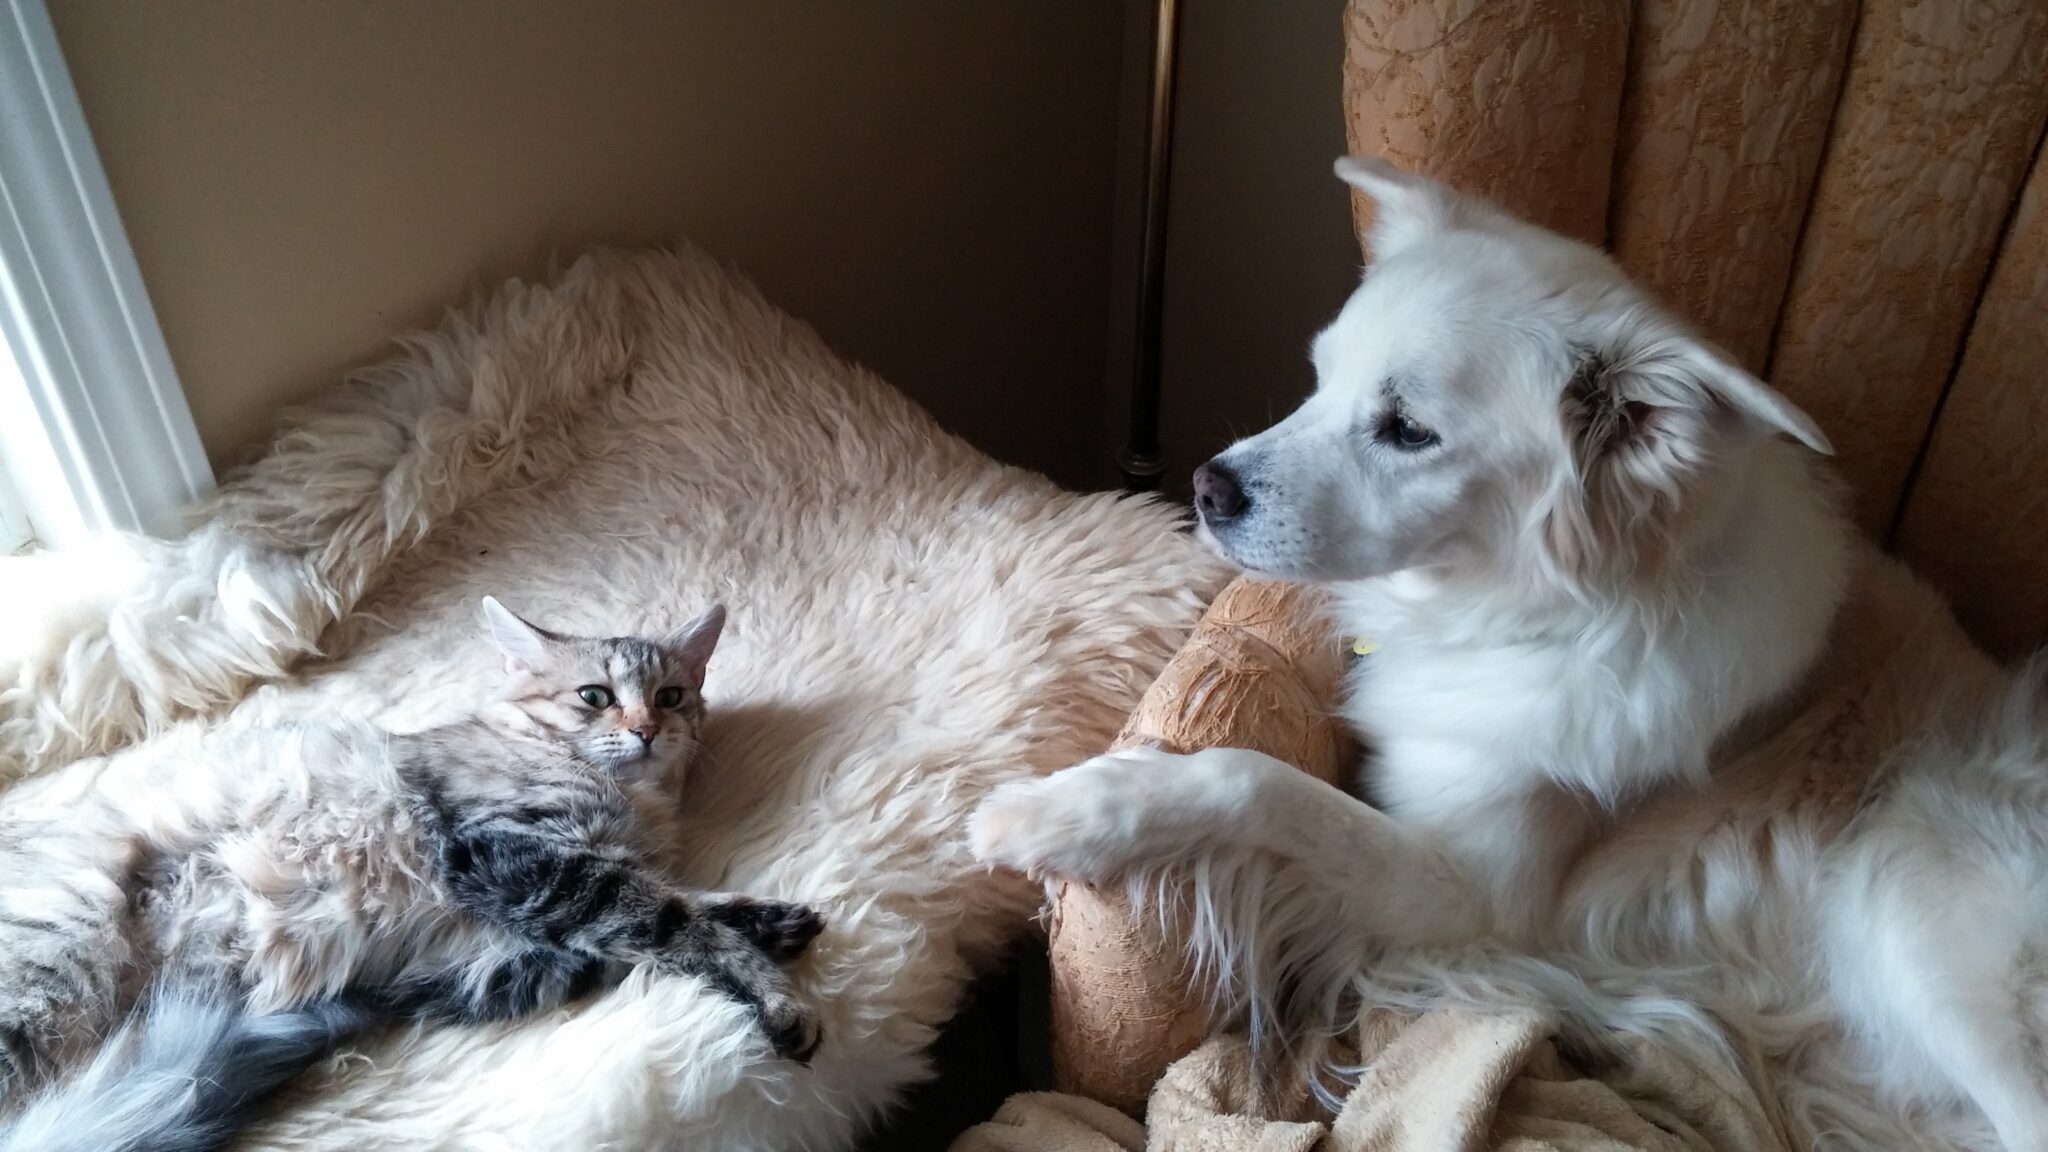 Can Dogs and Cats Live Together Peacefully? - Sweet Dreams Pet Sitting